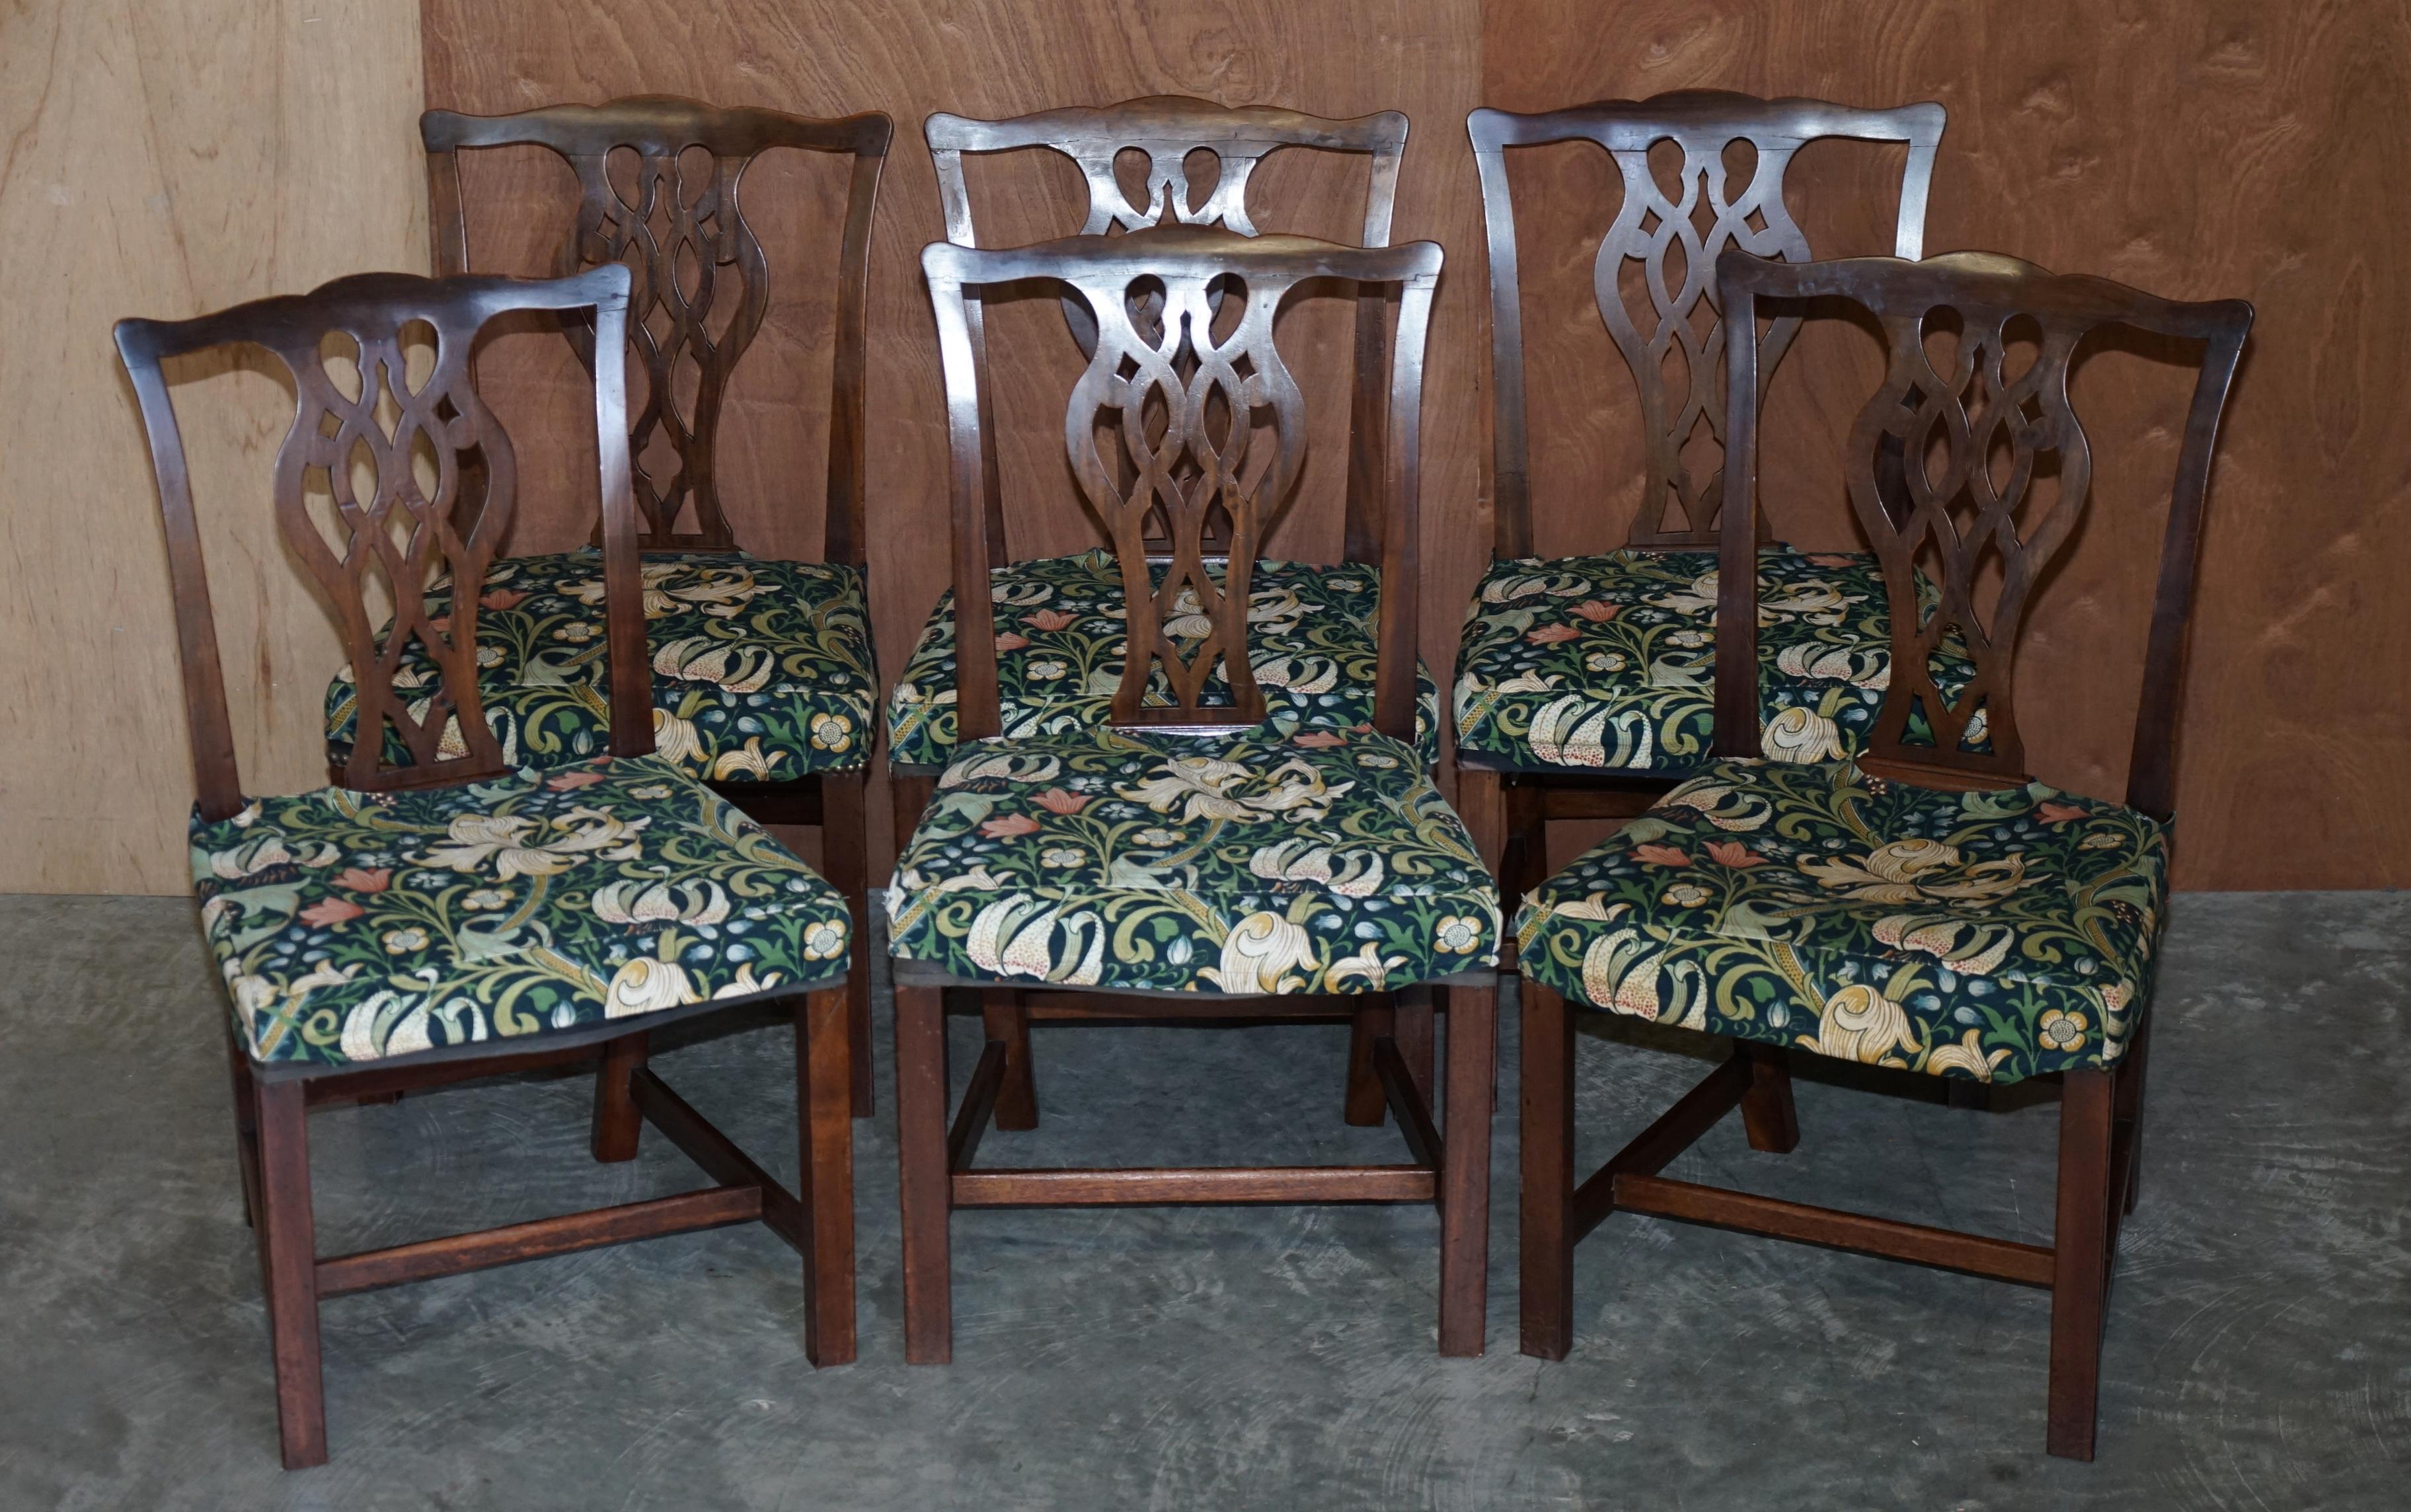 We are delighted to offer this suite of eight period George III circa 1830 hand made in England Mahogany dining chairs after Thomas Chippendale with William Morris removeable seat covers

These chairs are very well made important pieces of English